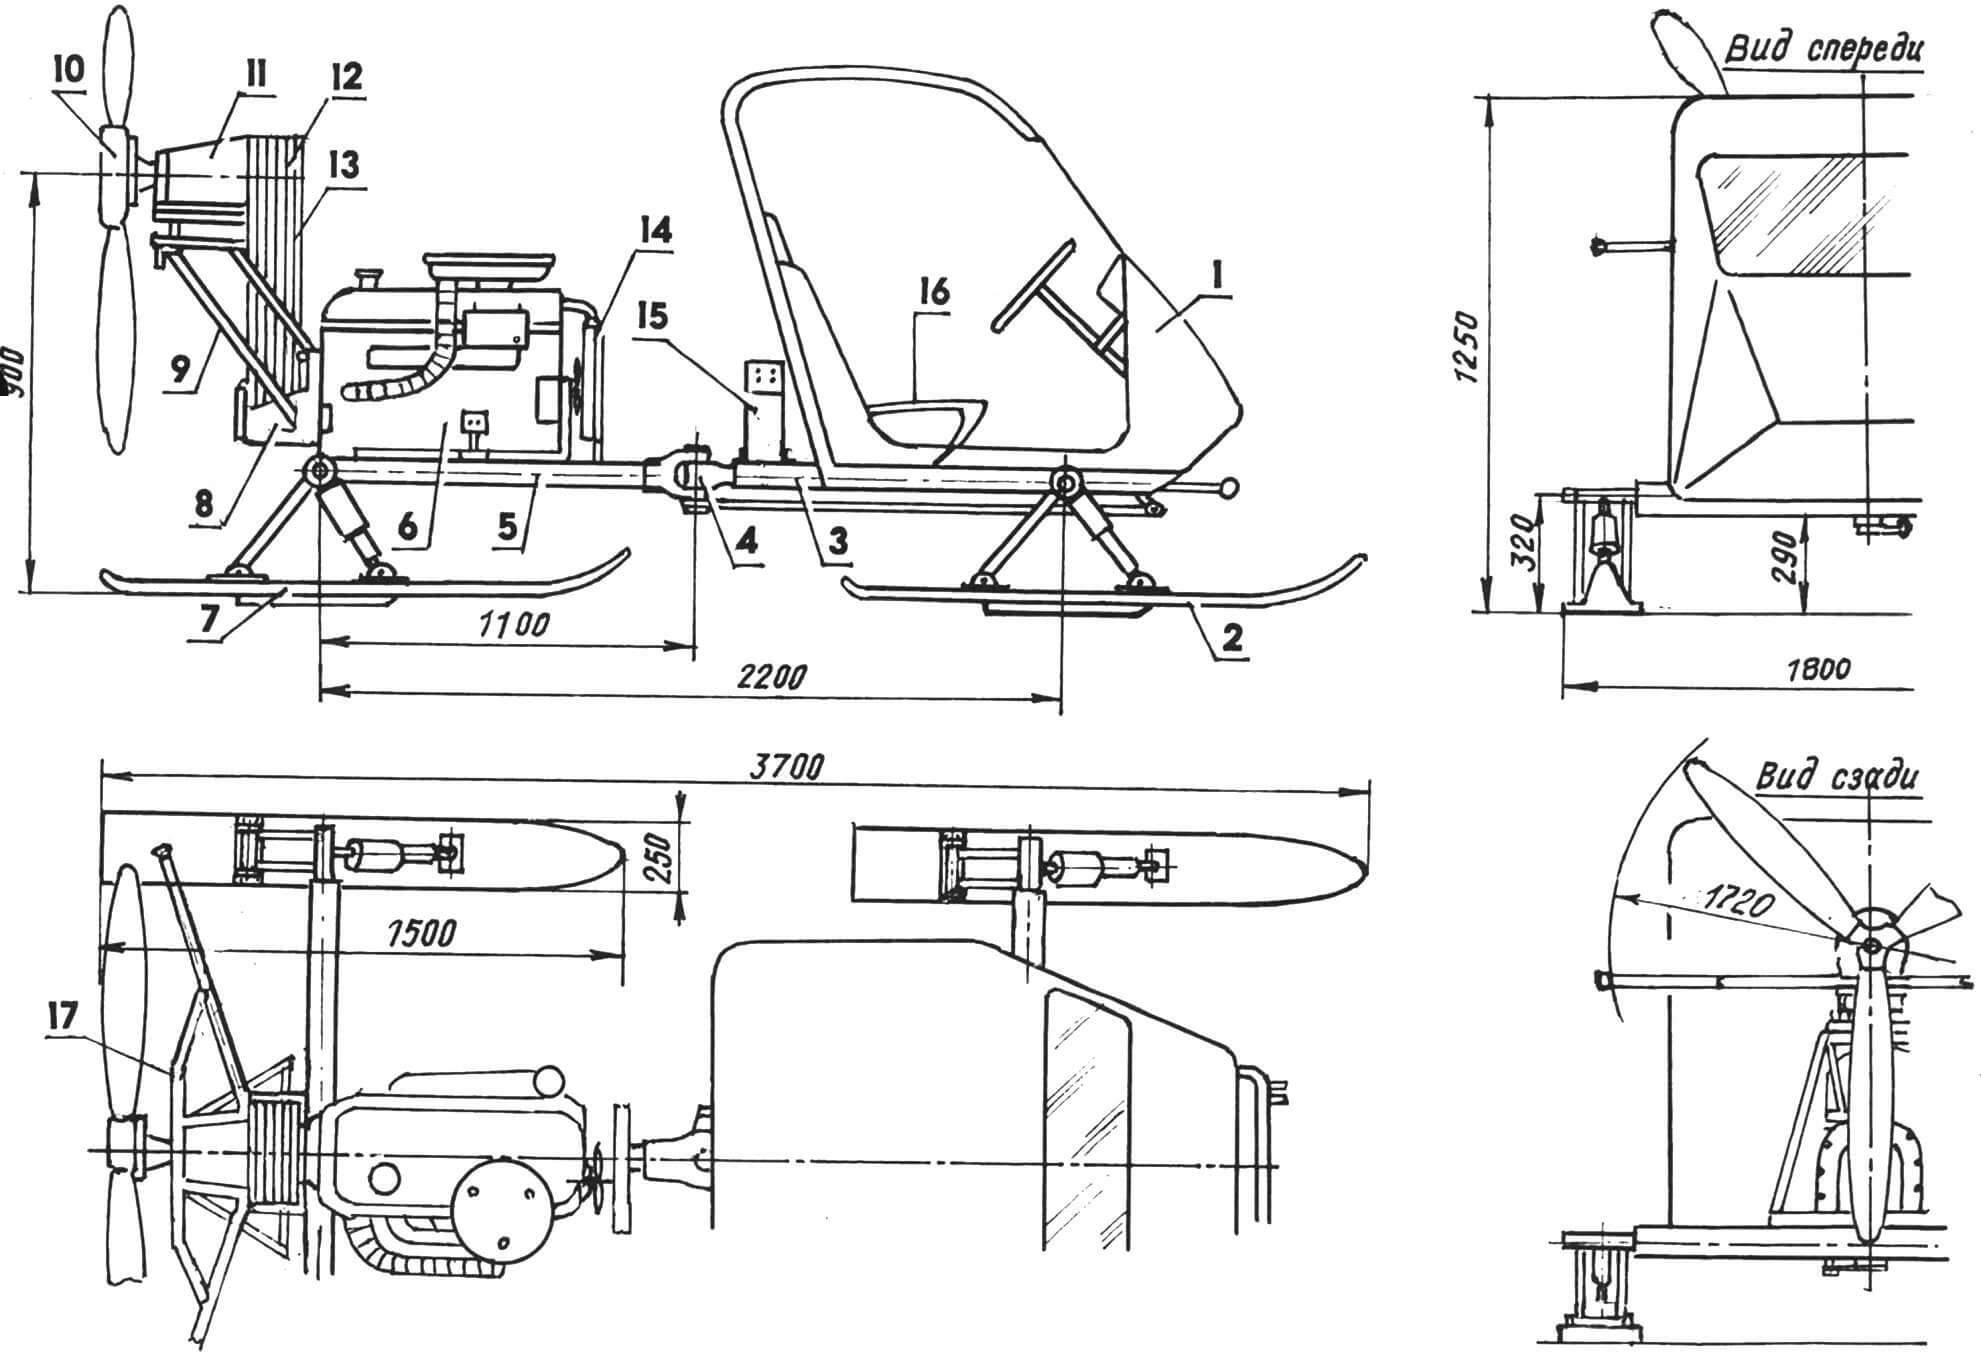 Layout and geometric diagram of snowmobiles